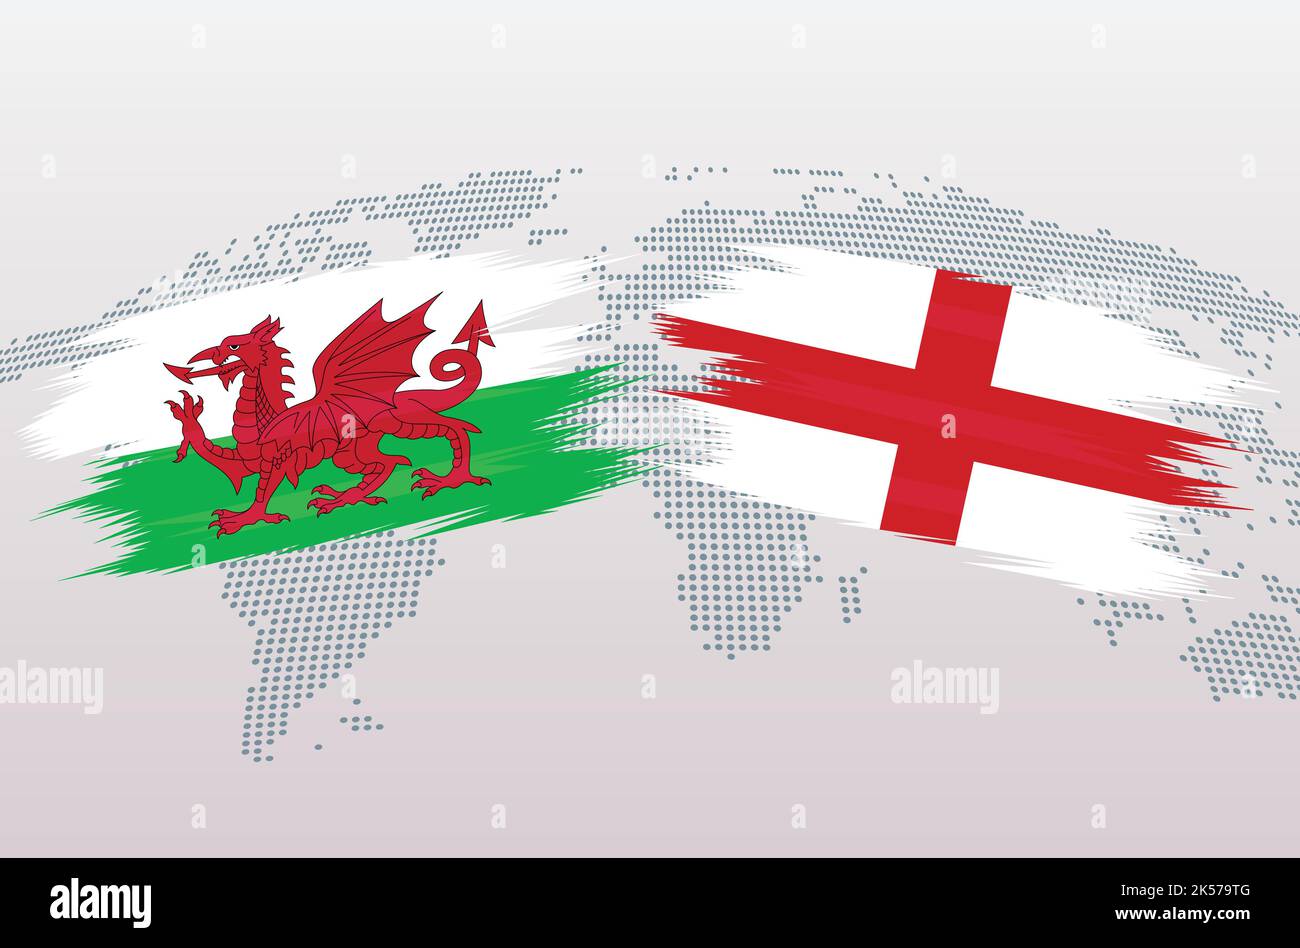 Wales vs England soccer ball in flag design on world map background for football tournament, vector for sport match template or banner. Stock Vector